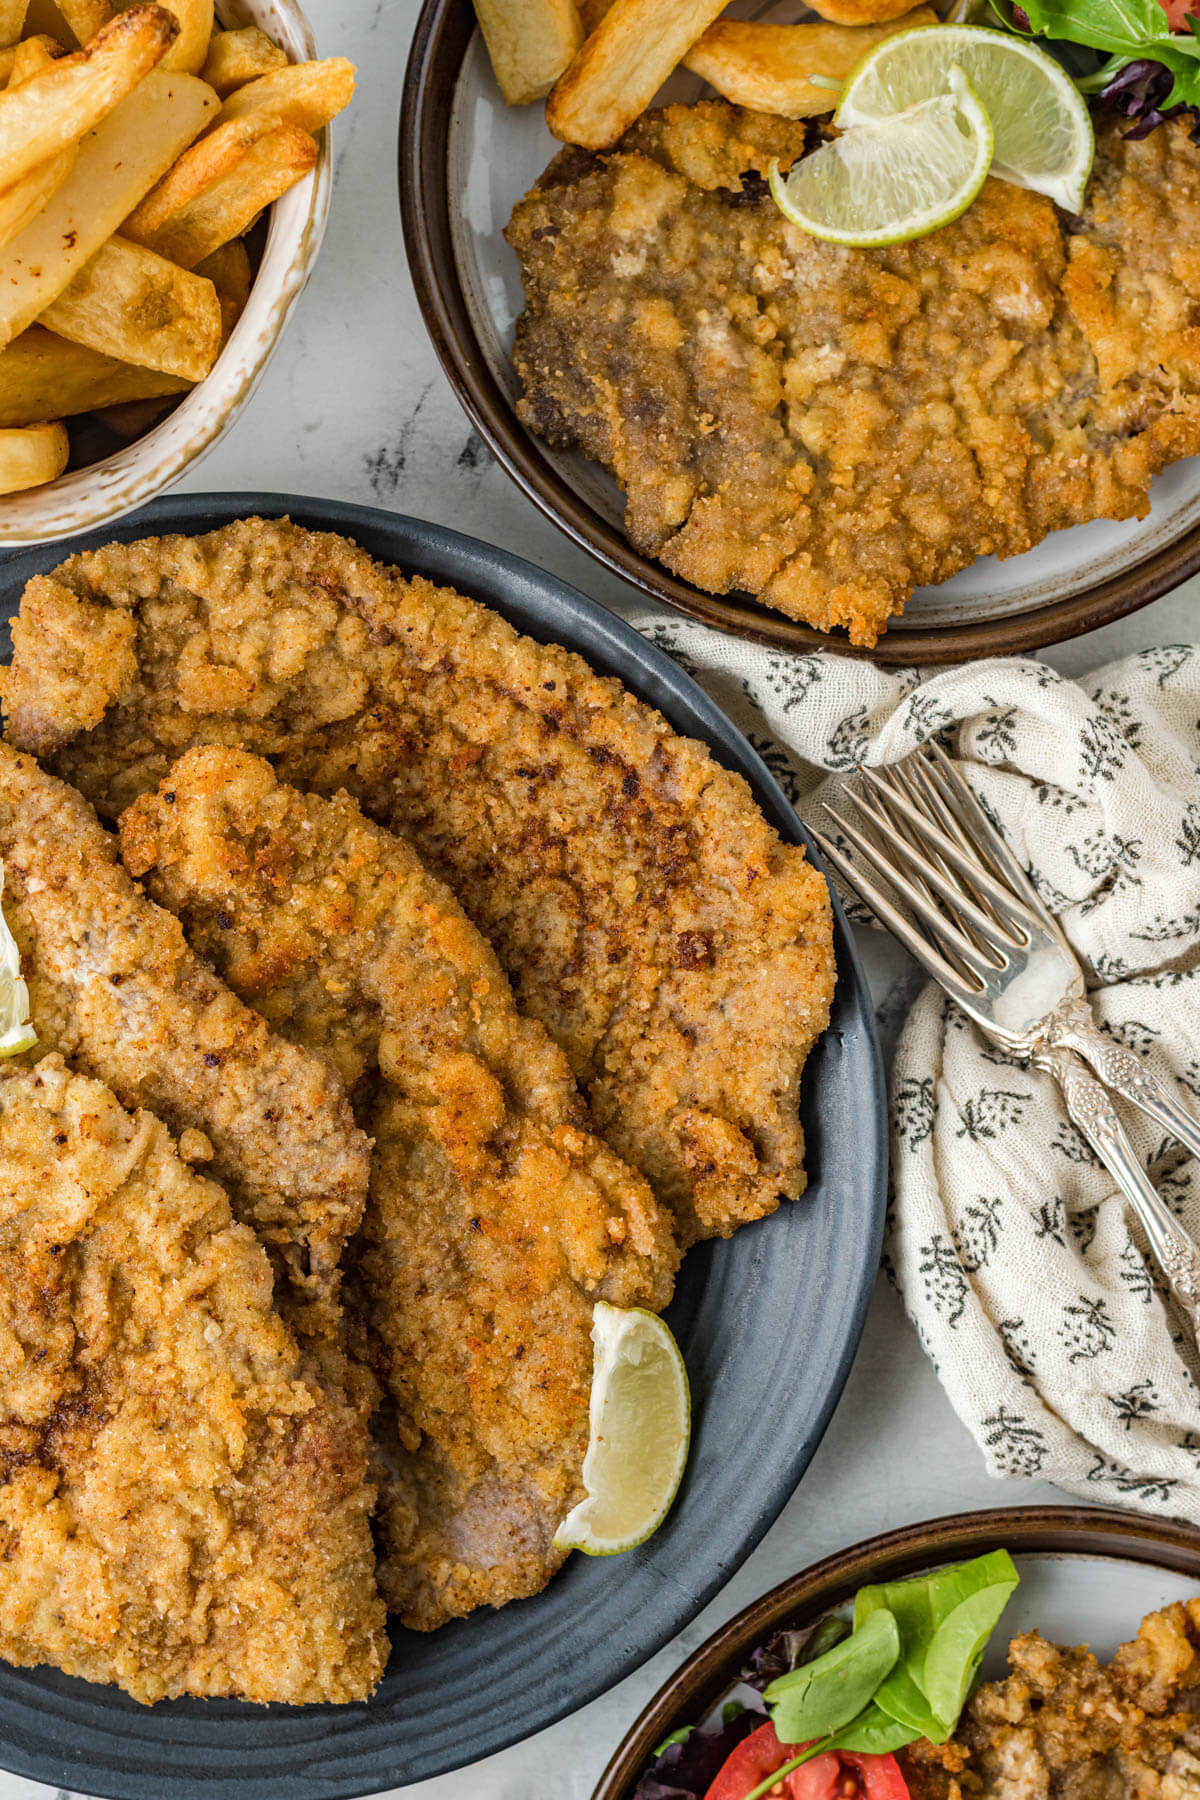 Golden fried Milanesas de Res arranged on a blue serving platter with wedges of lime.